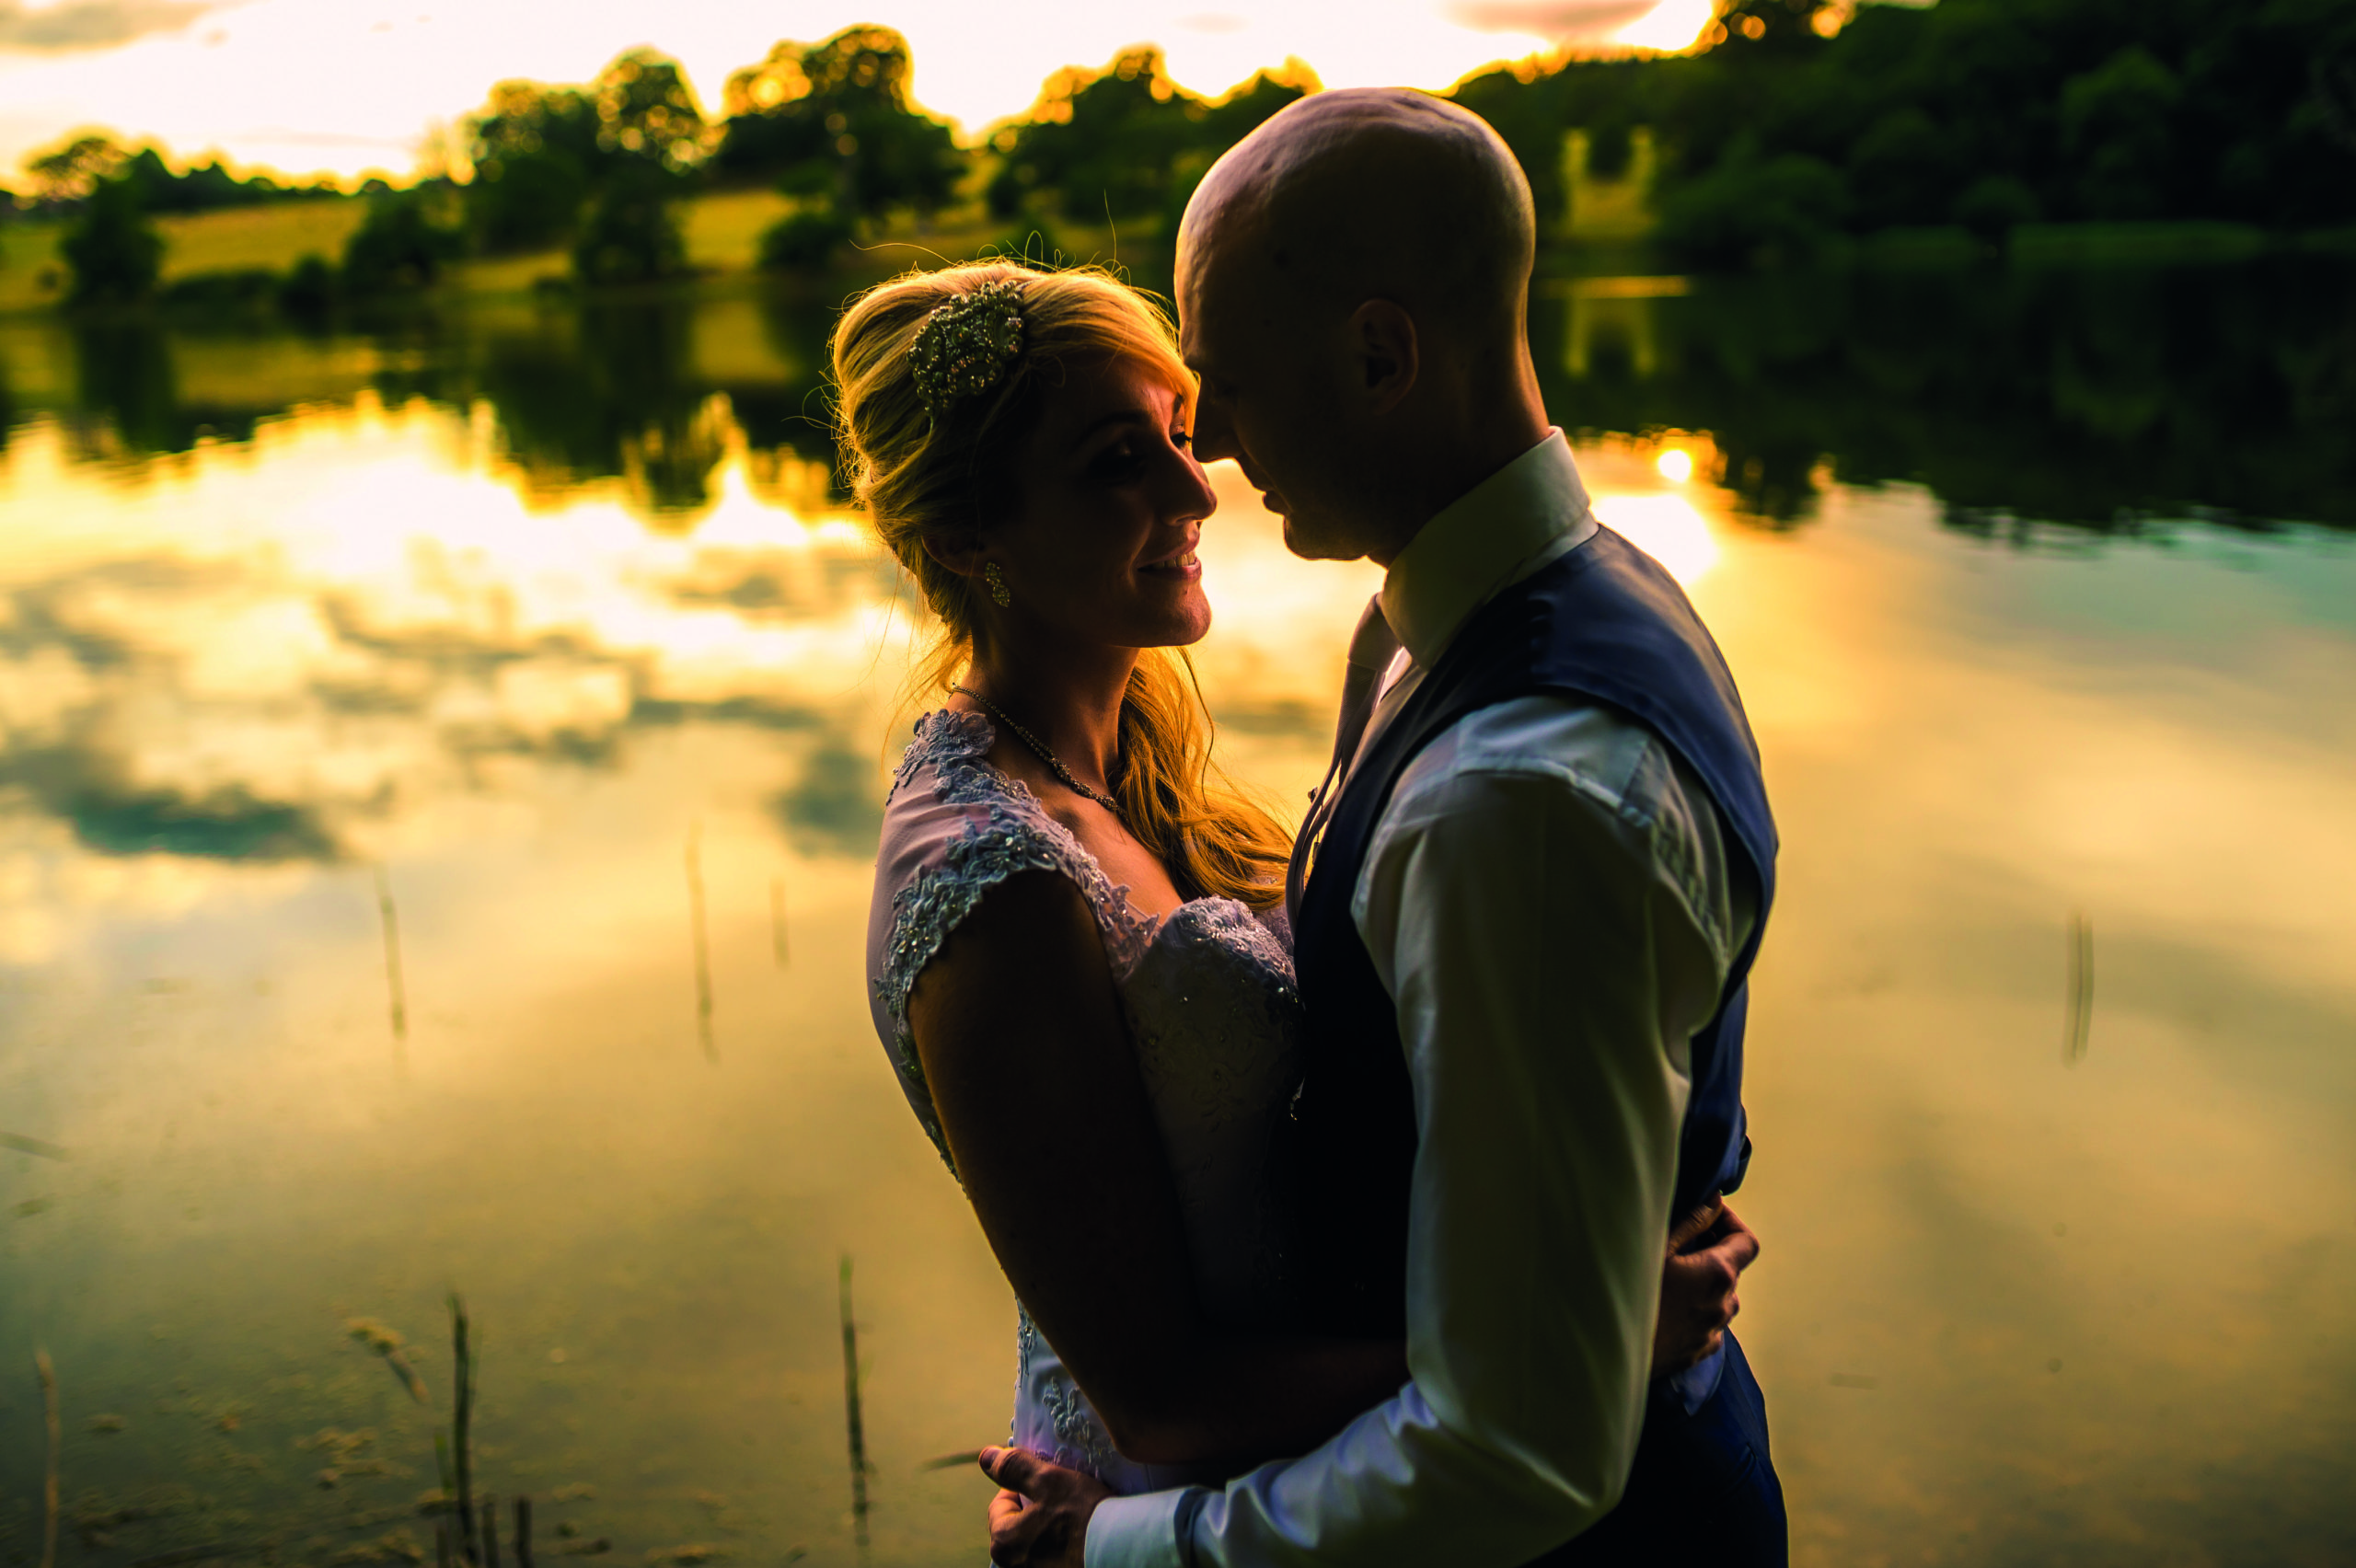 Golden hour wedding photography by the lake at Combermere Abbey